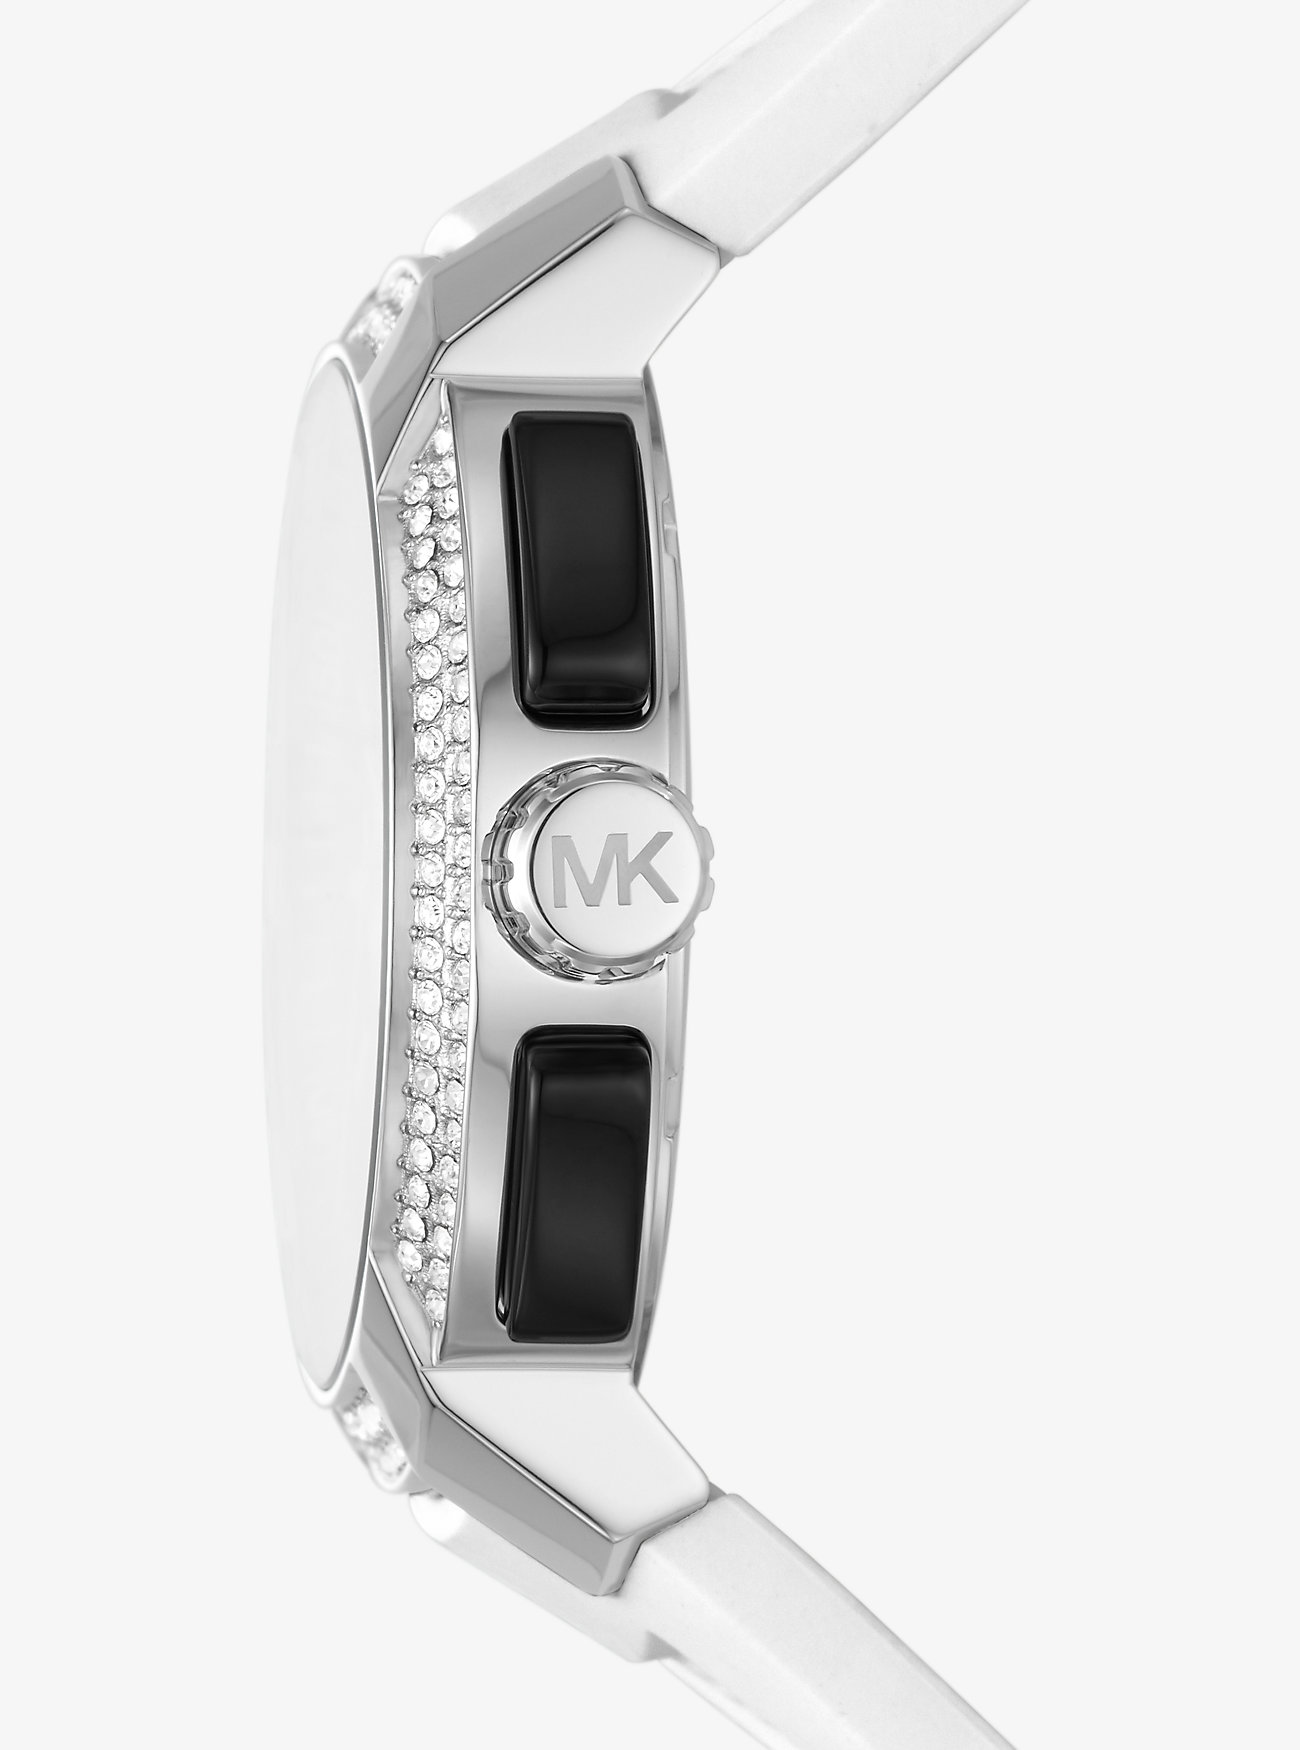 ĐỒNG HỒ MK NỮ MICHAEL KORS OVERSIZED PAVÉ SILVER-TONE AND SILICONE SPORT WATCH MK6947 6